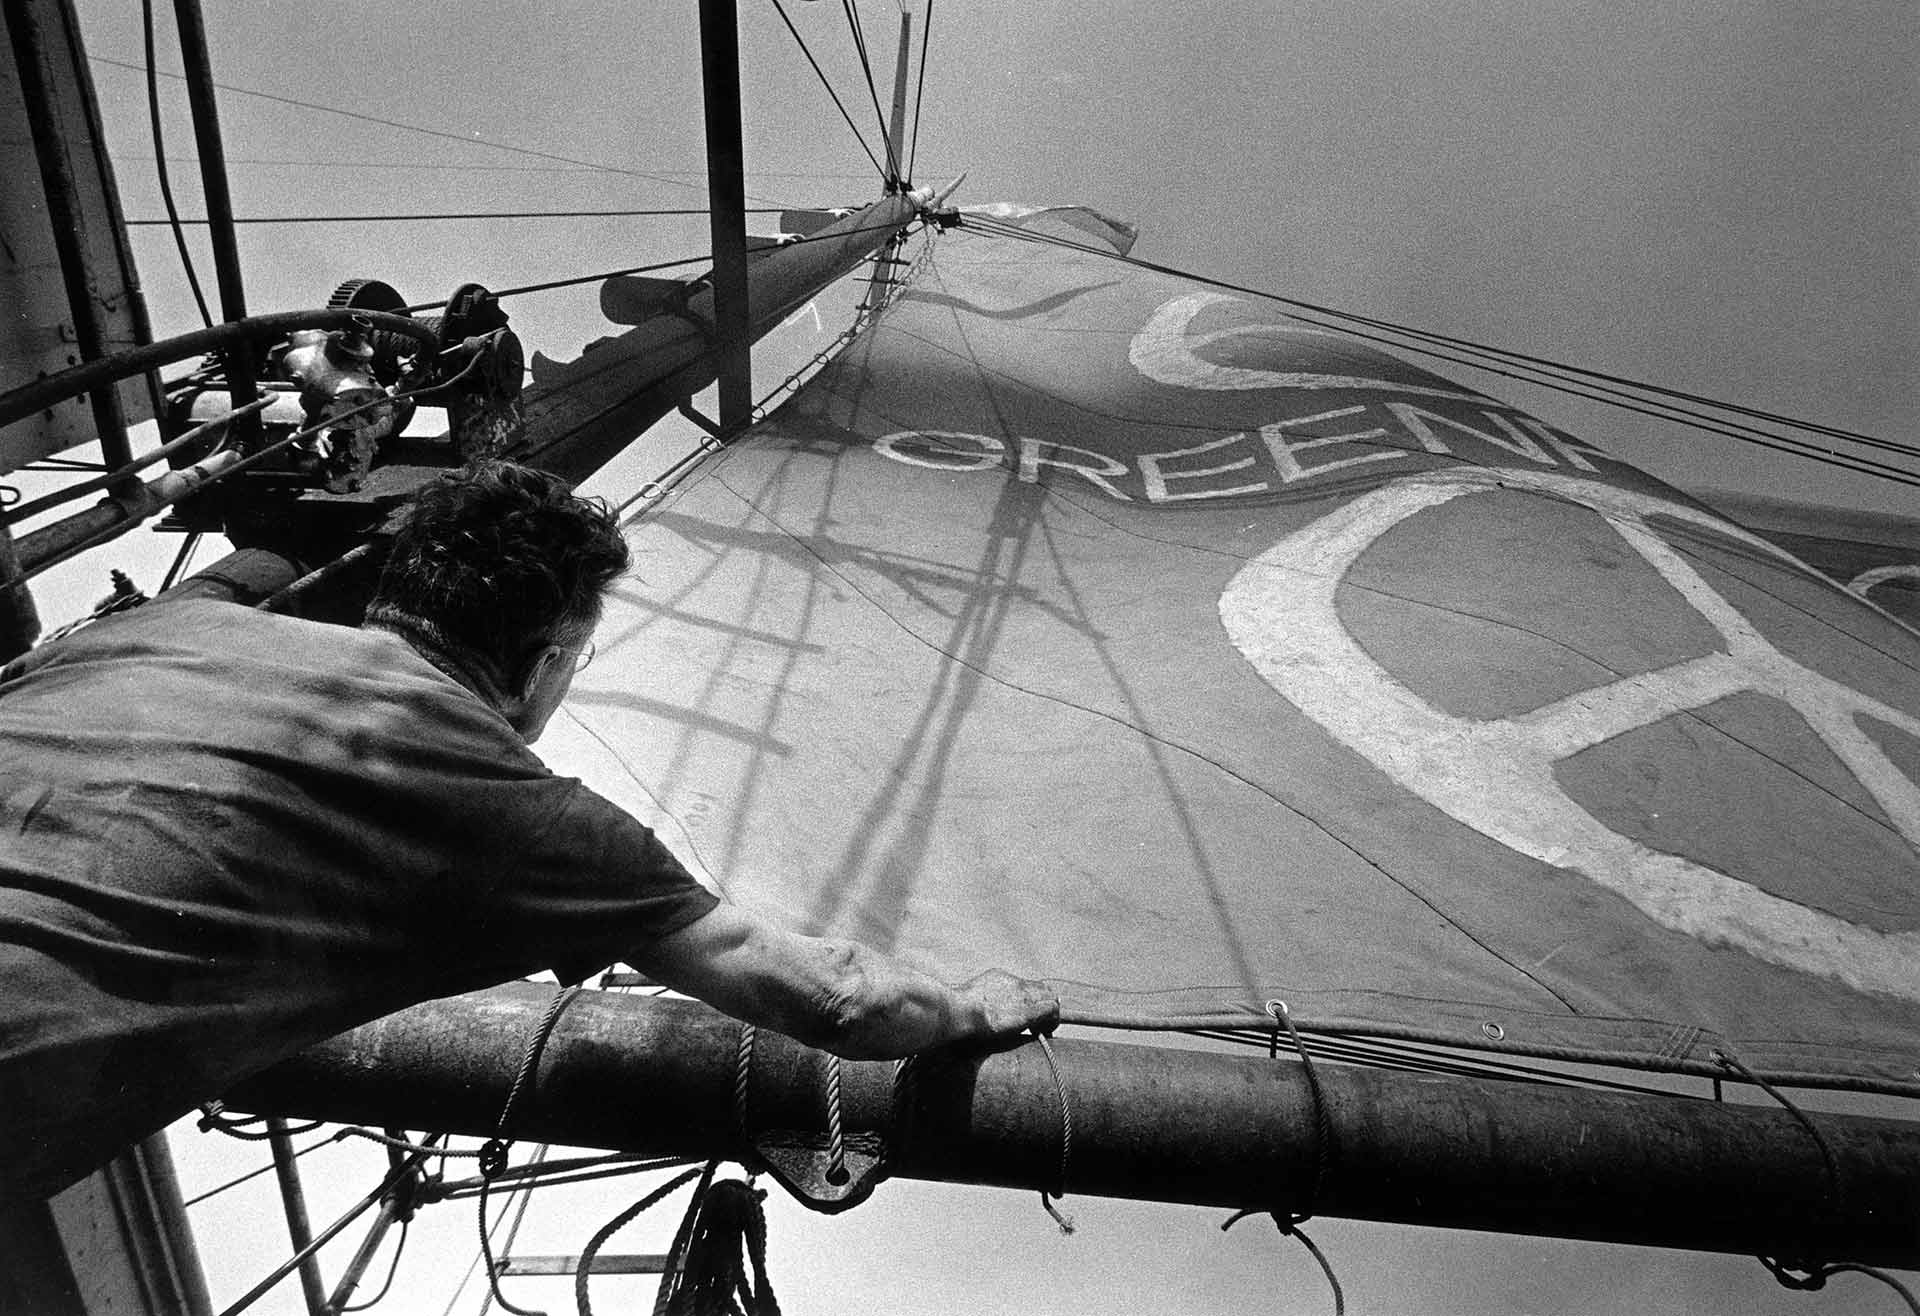 Dave Birmingham raises Greenpeace sail on Phyllis Cormack (also called "Greenpeace"). First Greenpeace campaign, sailing towards Amchitka island to prevent USA nuclear testing. September 1971.    (Greenpeace 30th Anniversary Images photo 1)  (Greenpeace Changing the World page 19)